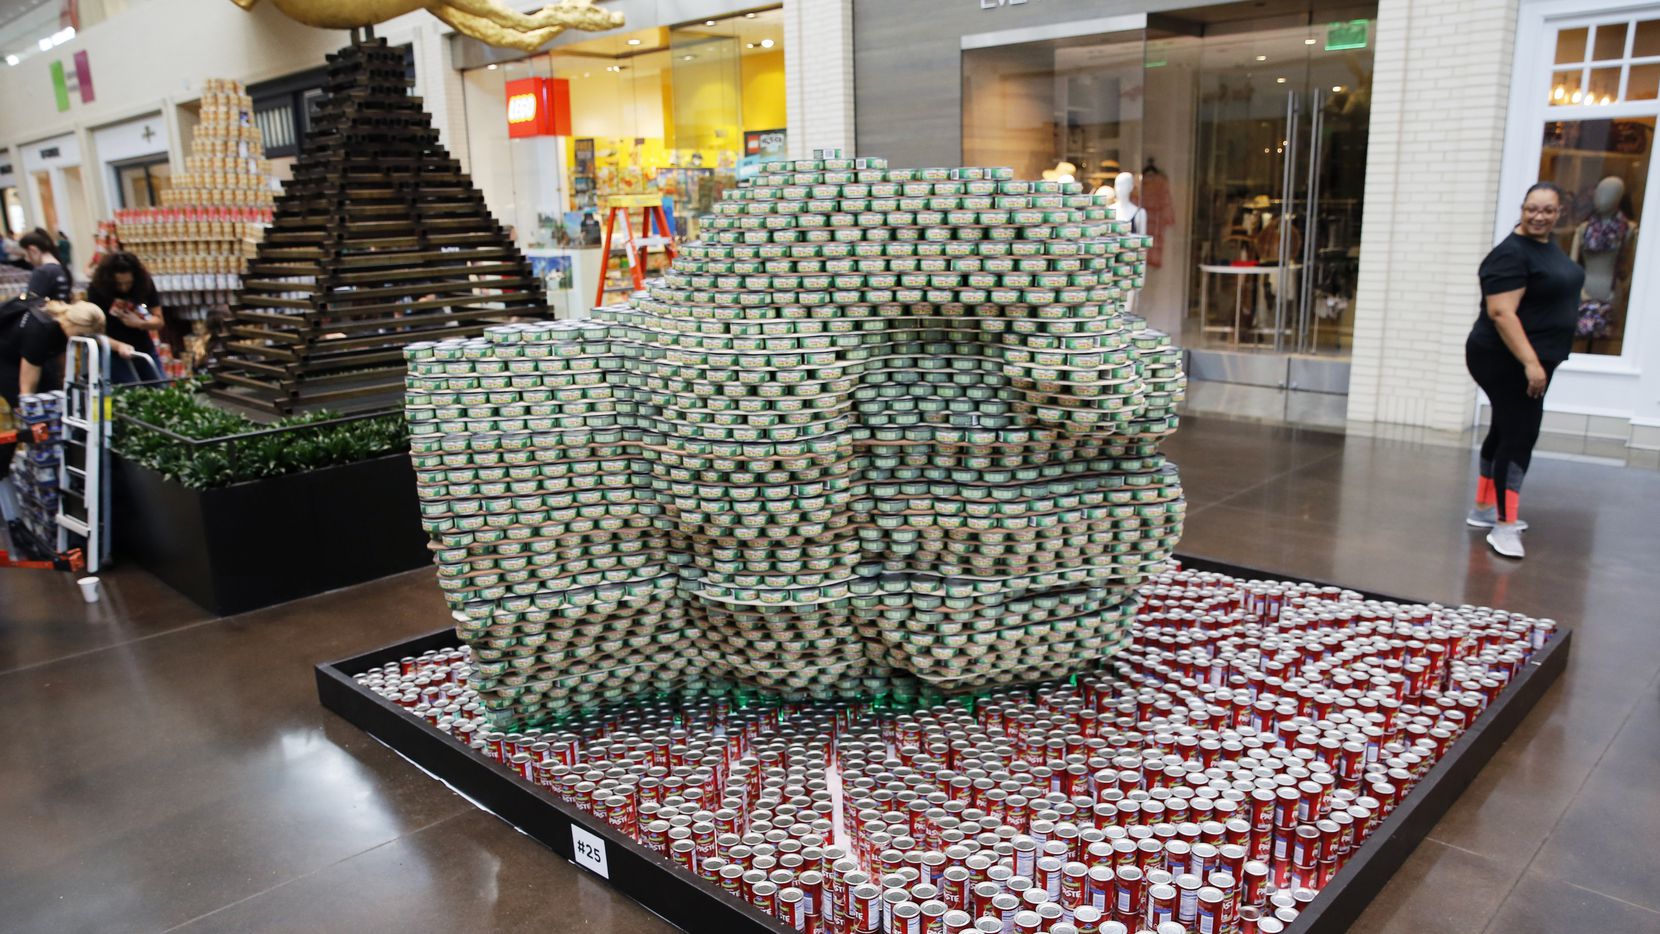 Marcia Johnson of Ridgemont Commercial Construction takes one last look at the "Hulk's Hand" the team built with Boka Powell during Canstruction at NorthPark Center in September.